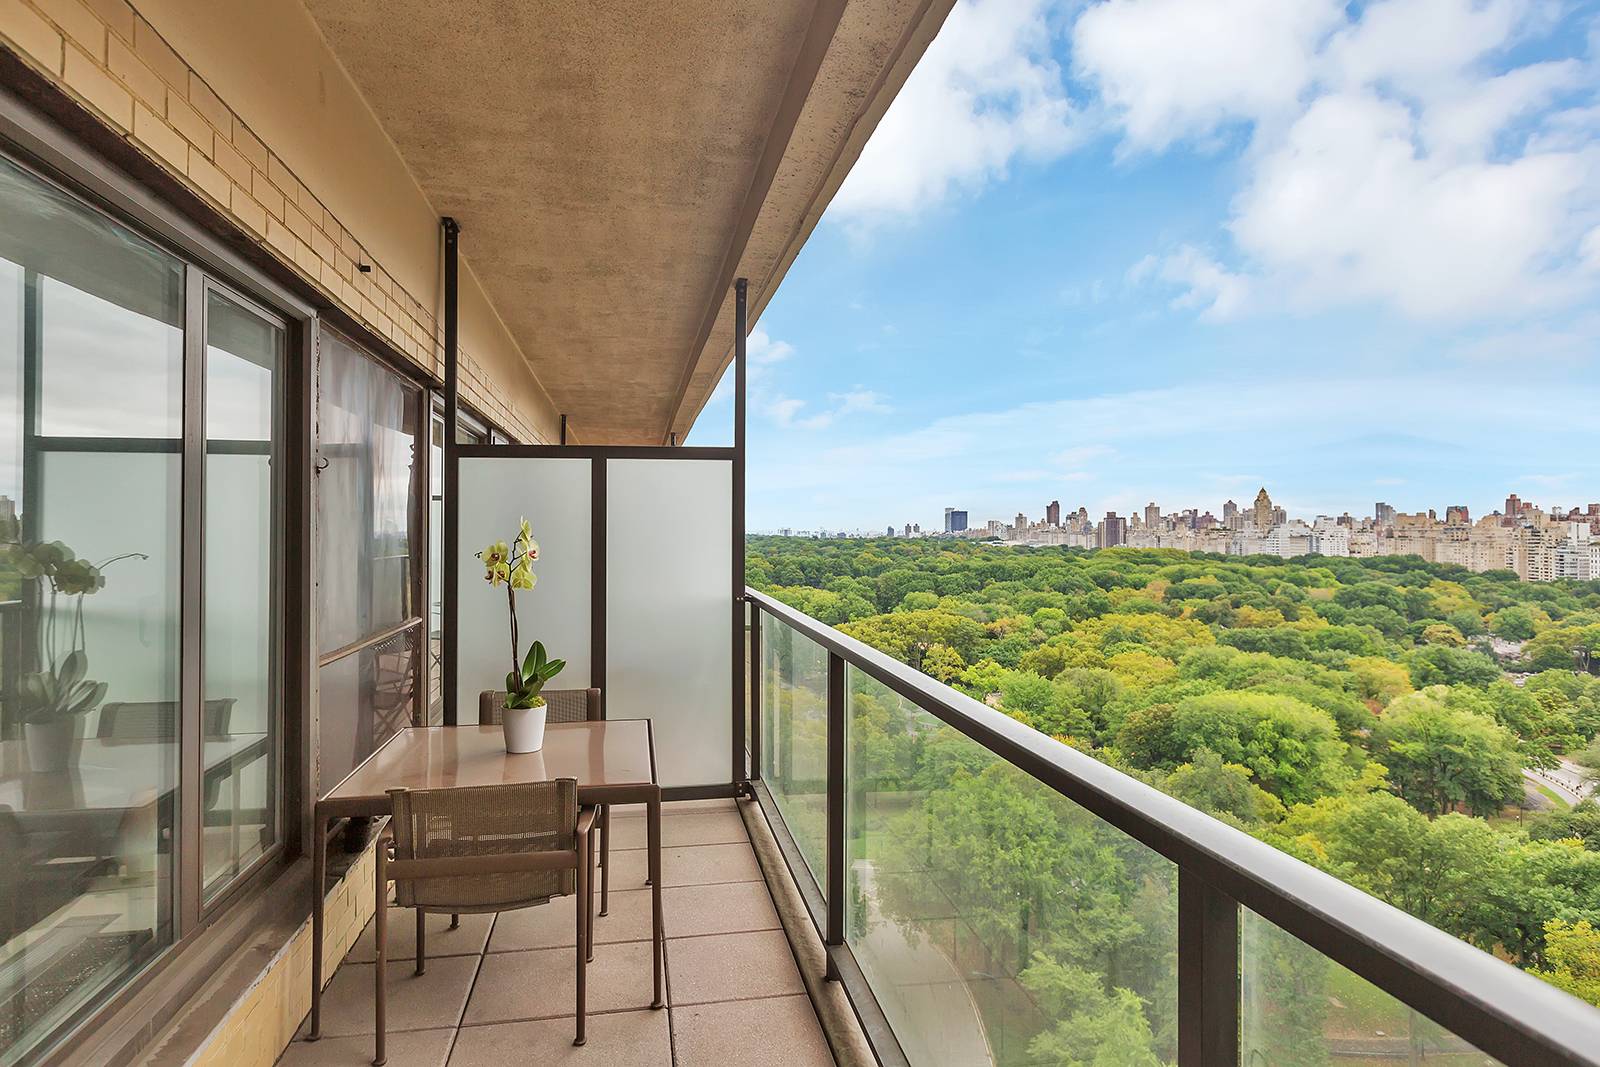 No Broker Fee!!!   Limited Time Only!!!   Tremendous Central Park South 3 Bedroom Apartment with 3.5 Baths featuring a Health Club and Rooftop Deck